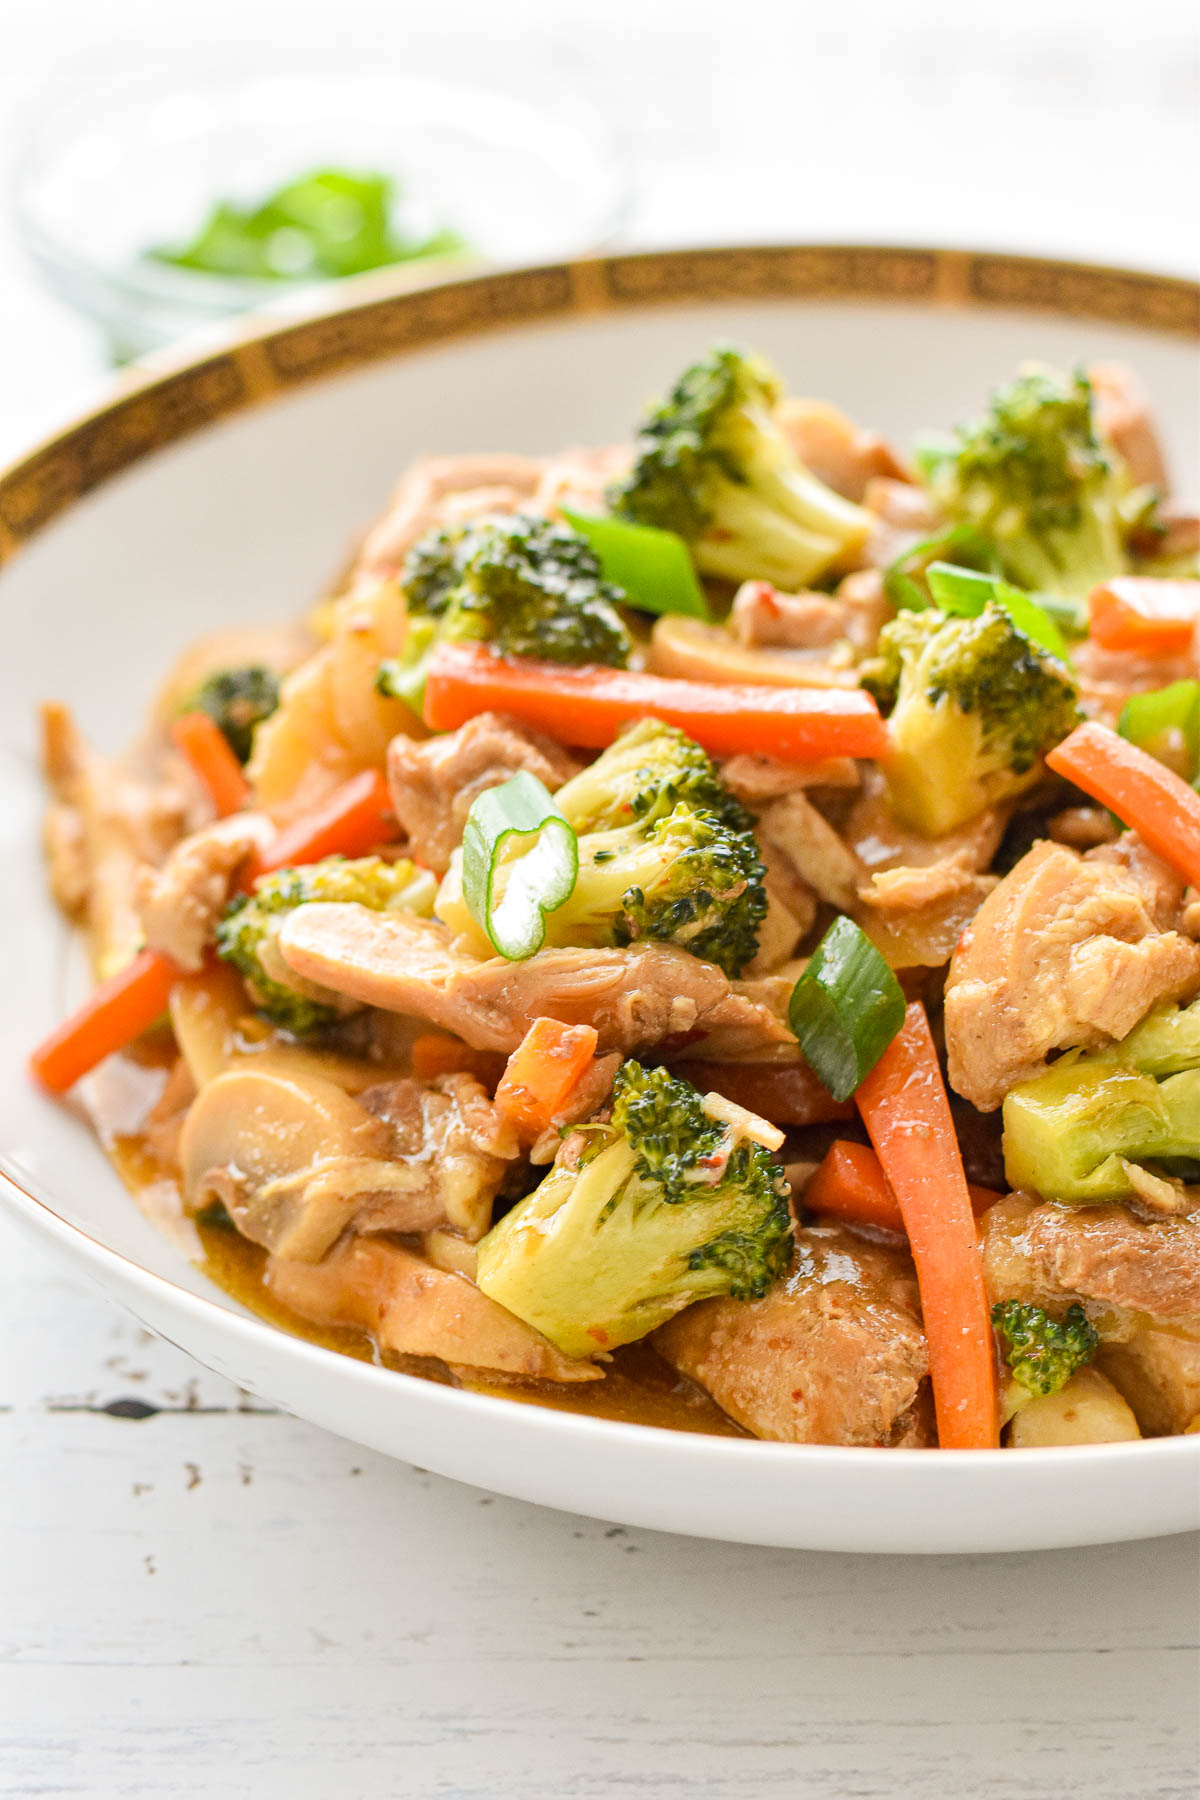 low fodmap low carb chicken stir fry with chopped broccoli, carrots, mushrooms, water chestnuts and scallions in a white bowl